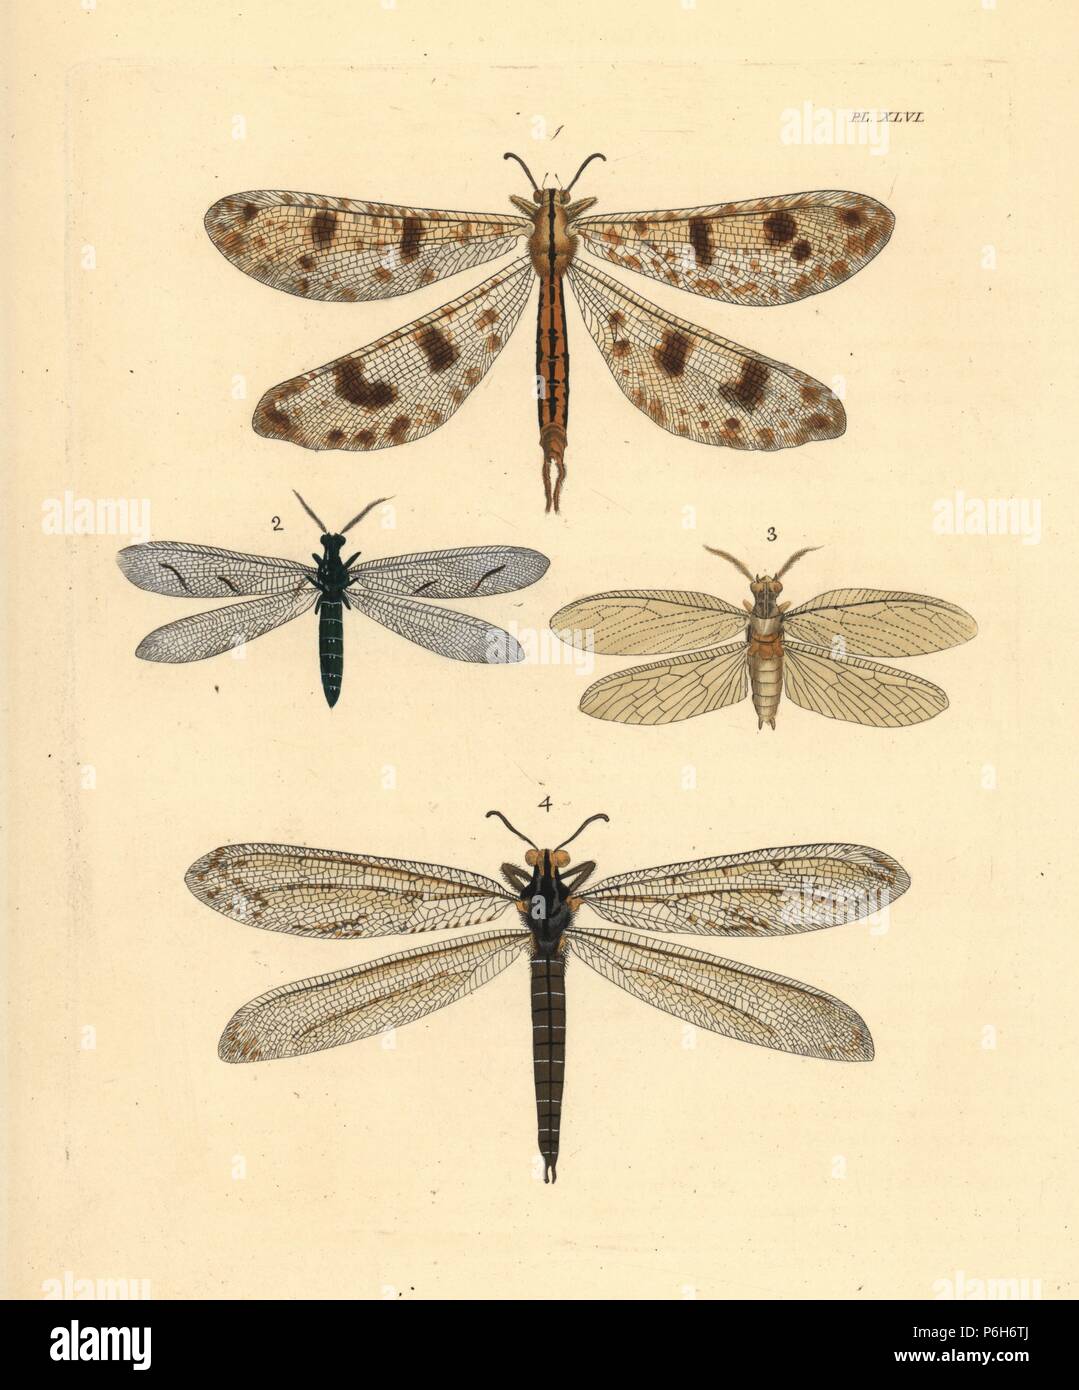 Antlion lacewing species: Palpares libelluloides 1, Euptilon ornatum 2, fishfly species, Chauliodes pectinicornis 3, and lacy wings, Vella americana 4. Handcoloured lithograph from John O. Westwood's new edition of Dru Drury's 'Illustrations of Exotic Entomology,' Bohn, London, 1837. Stock Photo